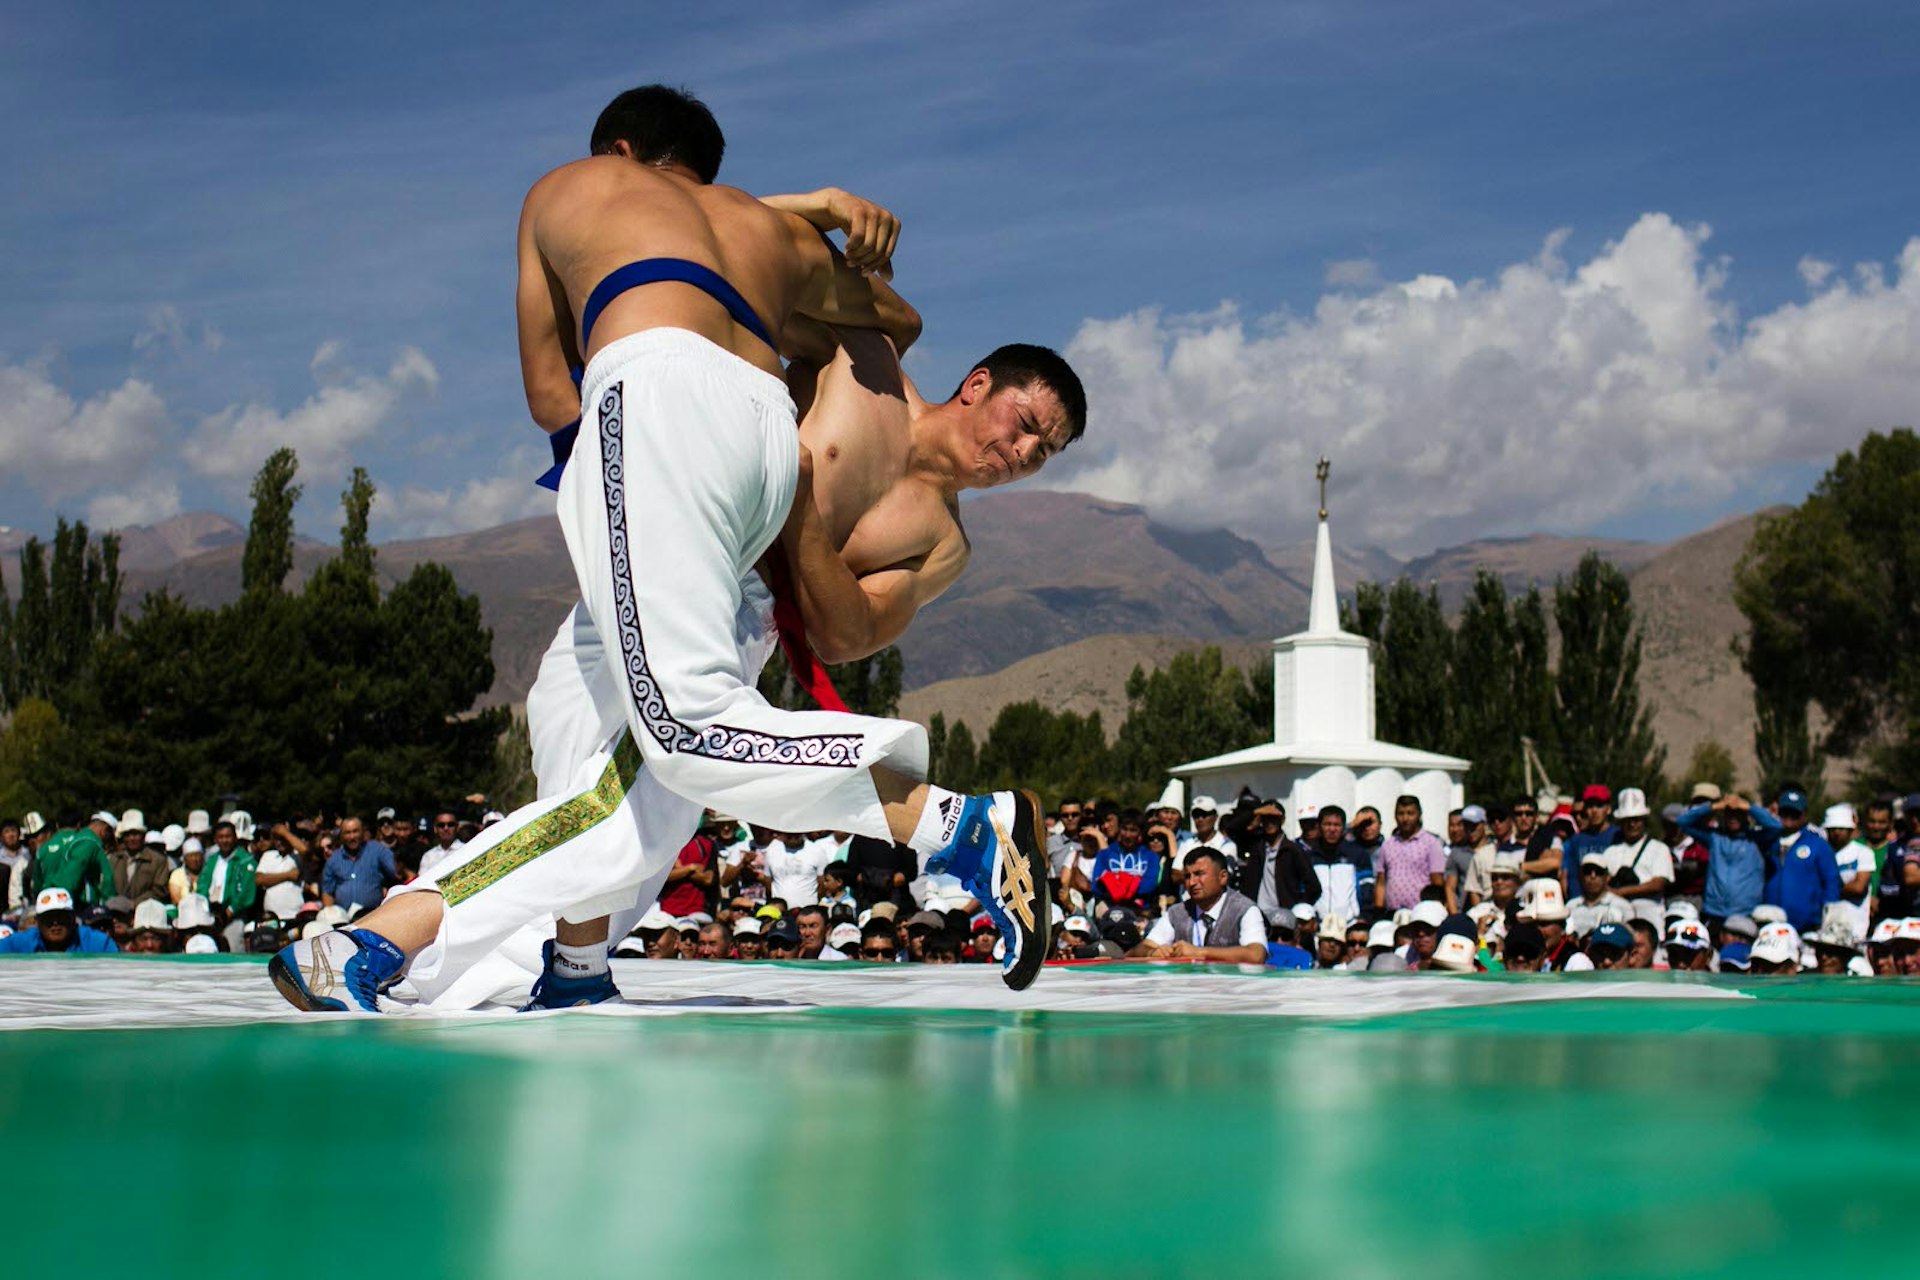 Kyrgyz Kurosh wrestlers fight for the win at the Rukh Ordo complex in Cholpon-Ata during the 2014 World Nomad Games in Kyrgyzstan © Stephen Lioy / Lonely Planet